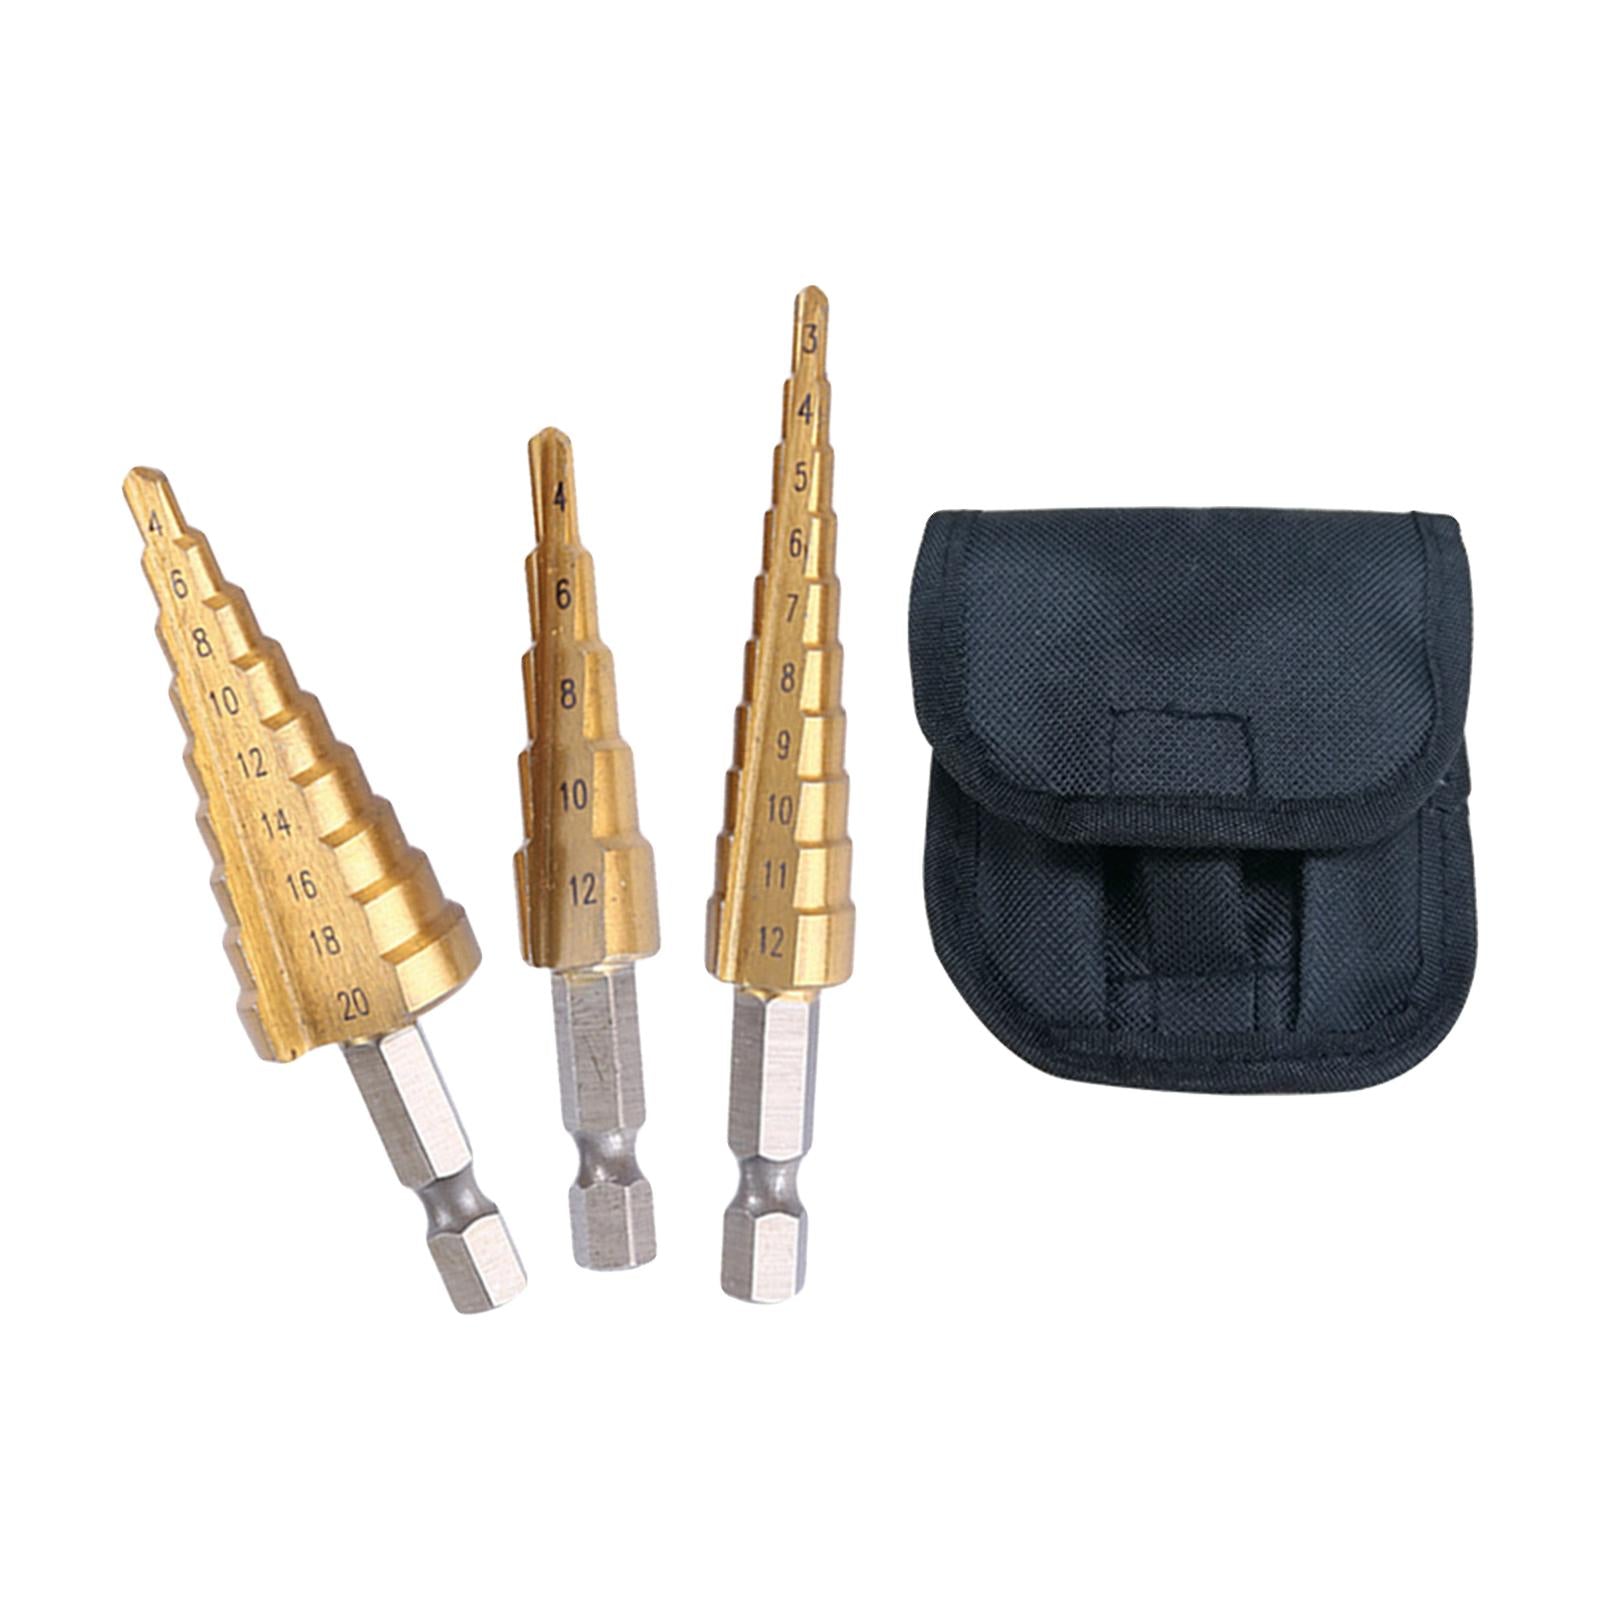 Drilling Step Drill Bit for Stainless Steel Metal 3pcs 3-12 4-12  4-20